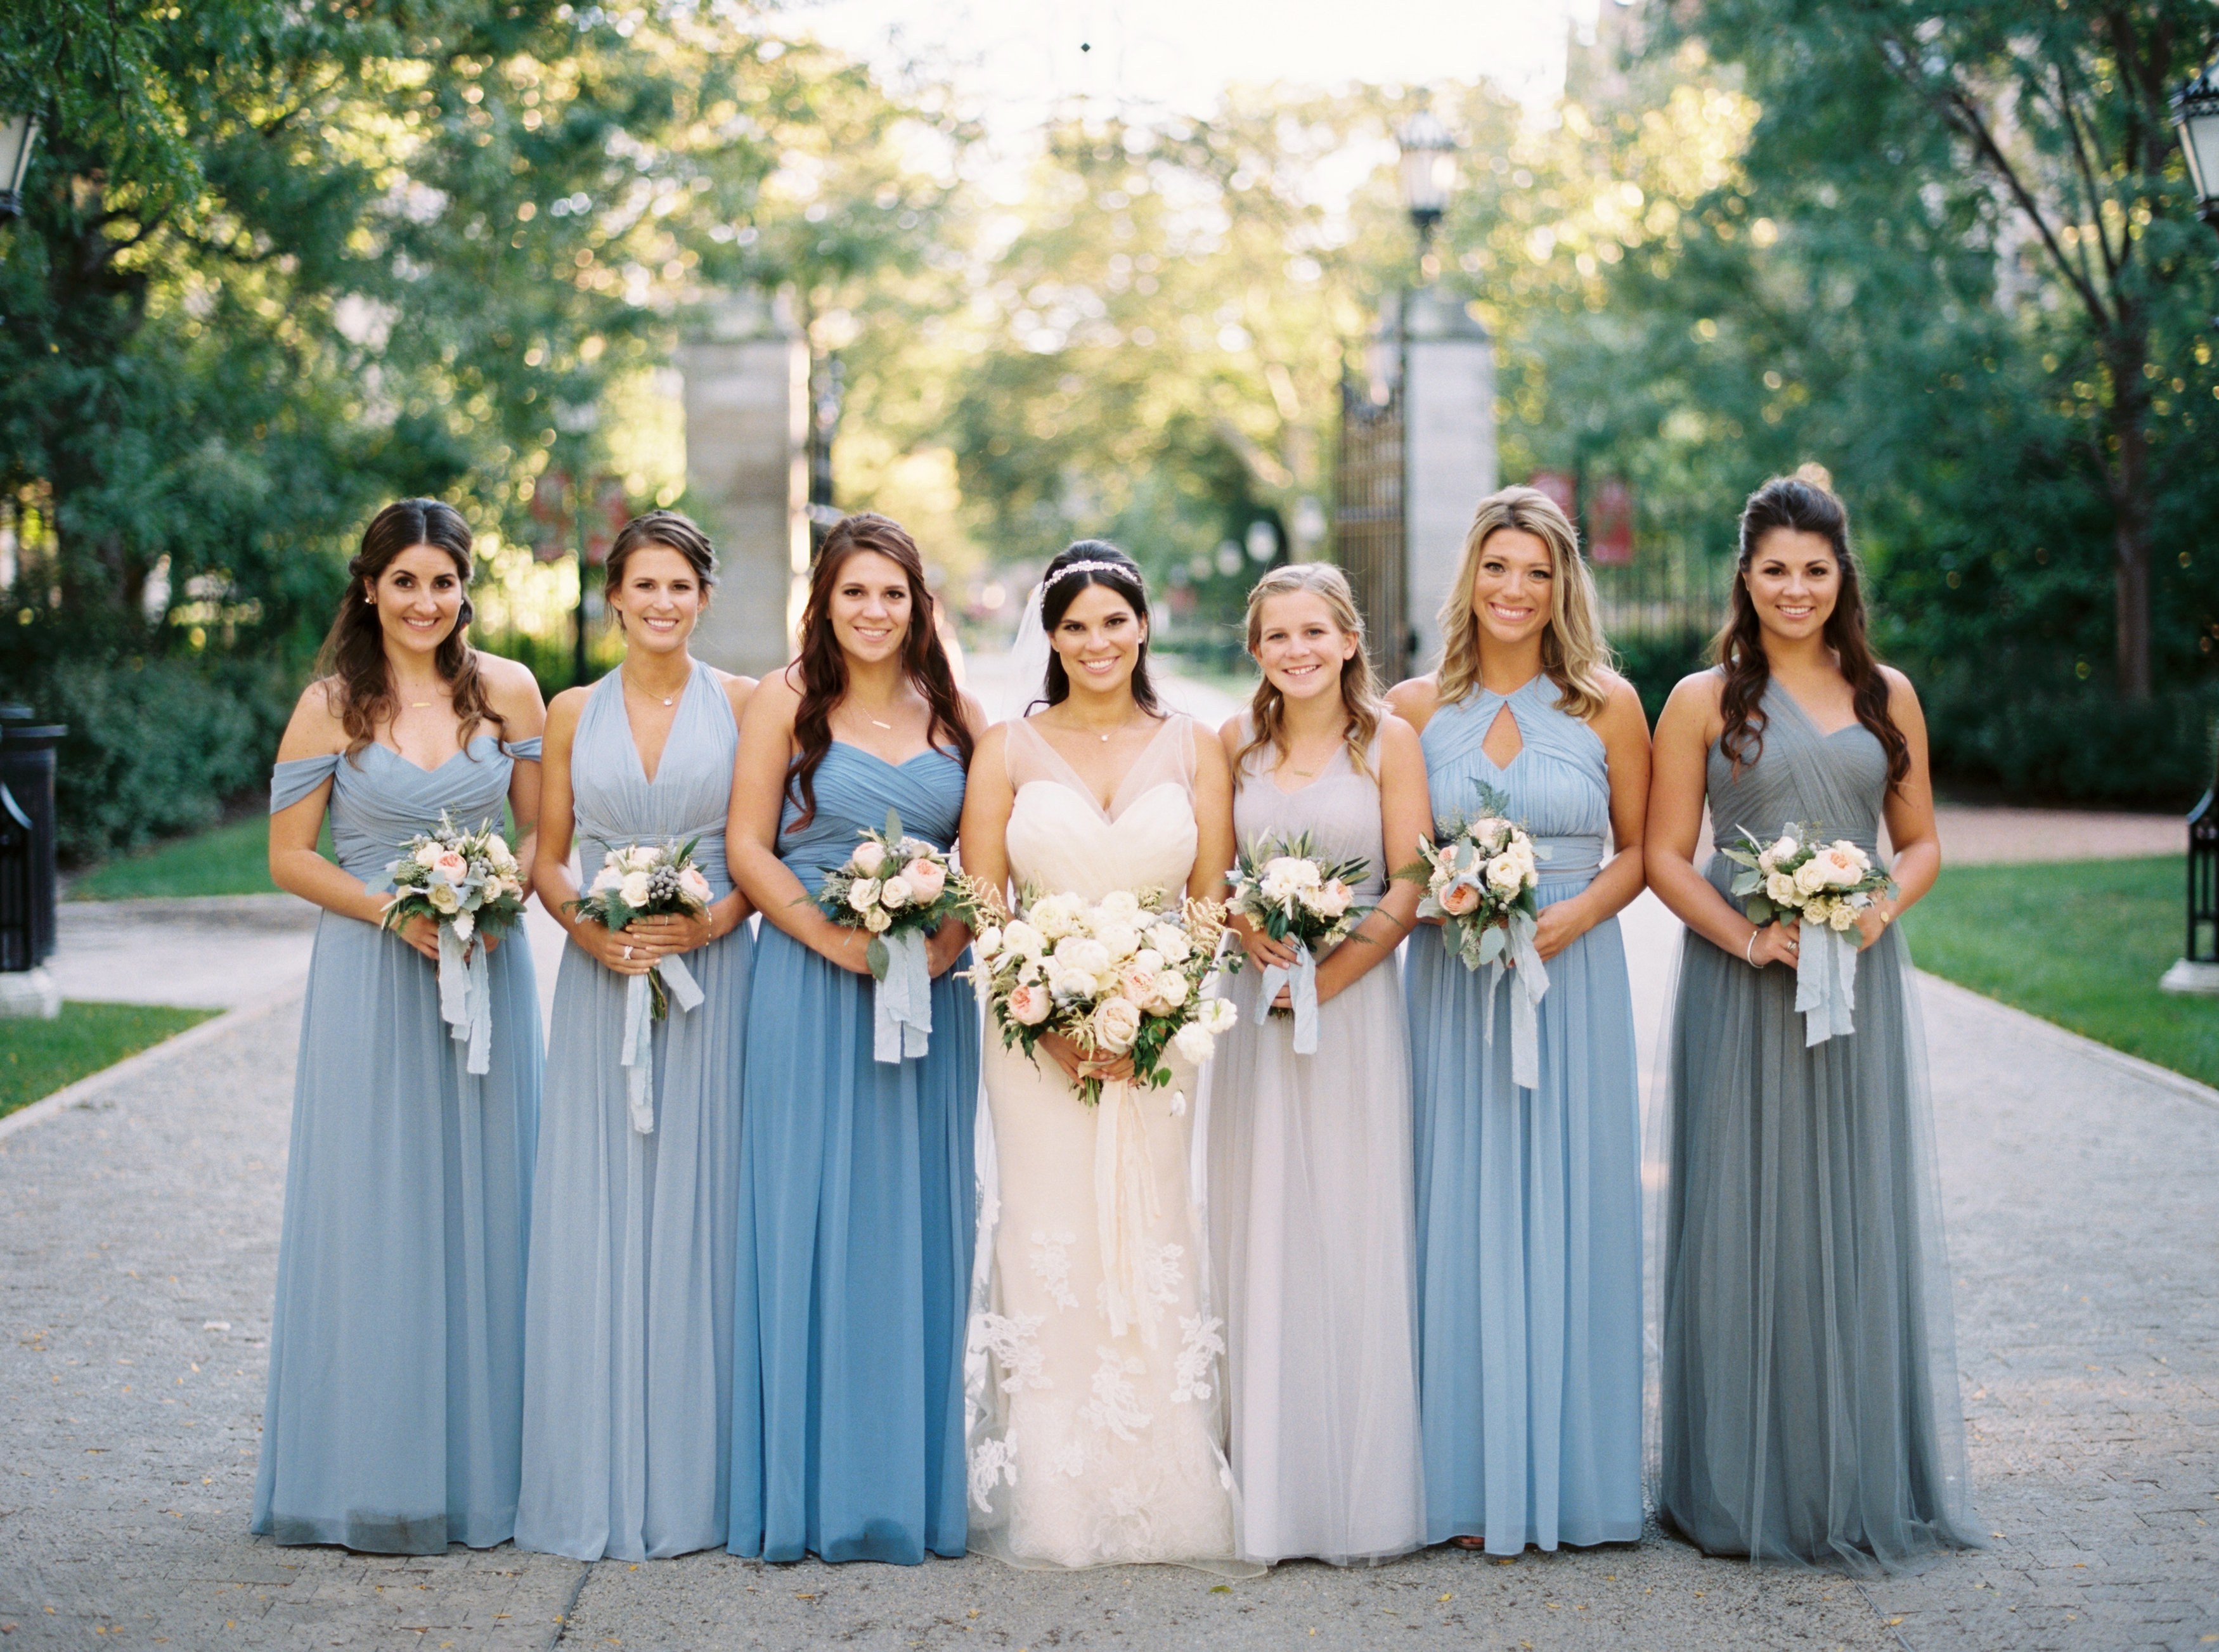 Bridesmaid Dress Shopping Tips: How to Choose Timeless Gowns | Brides